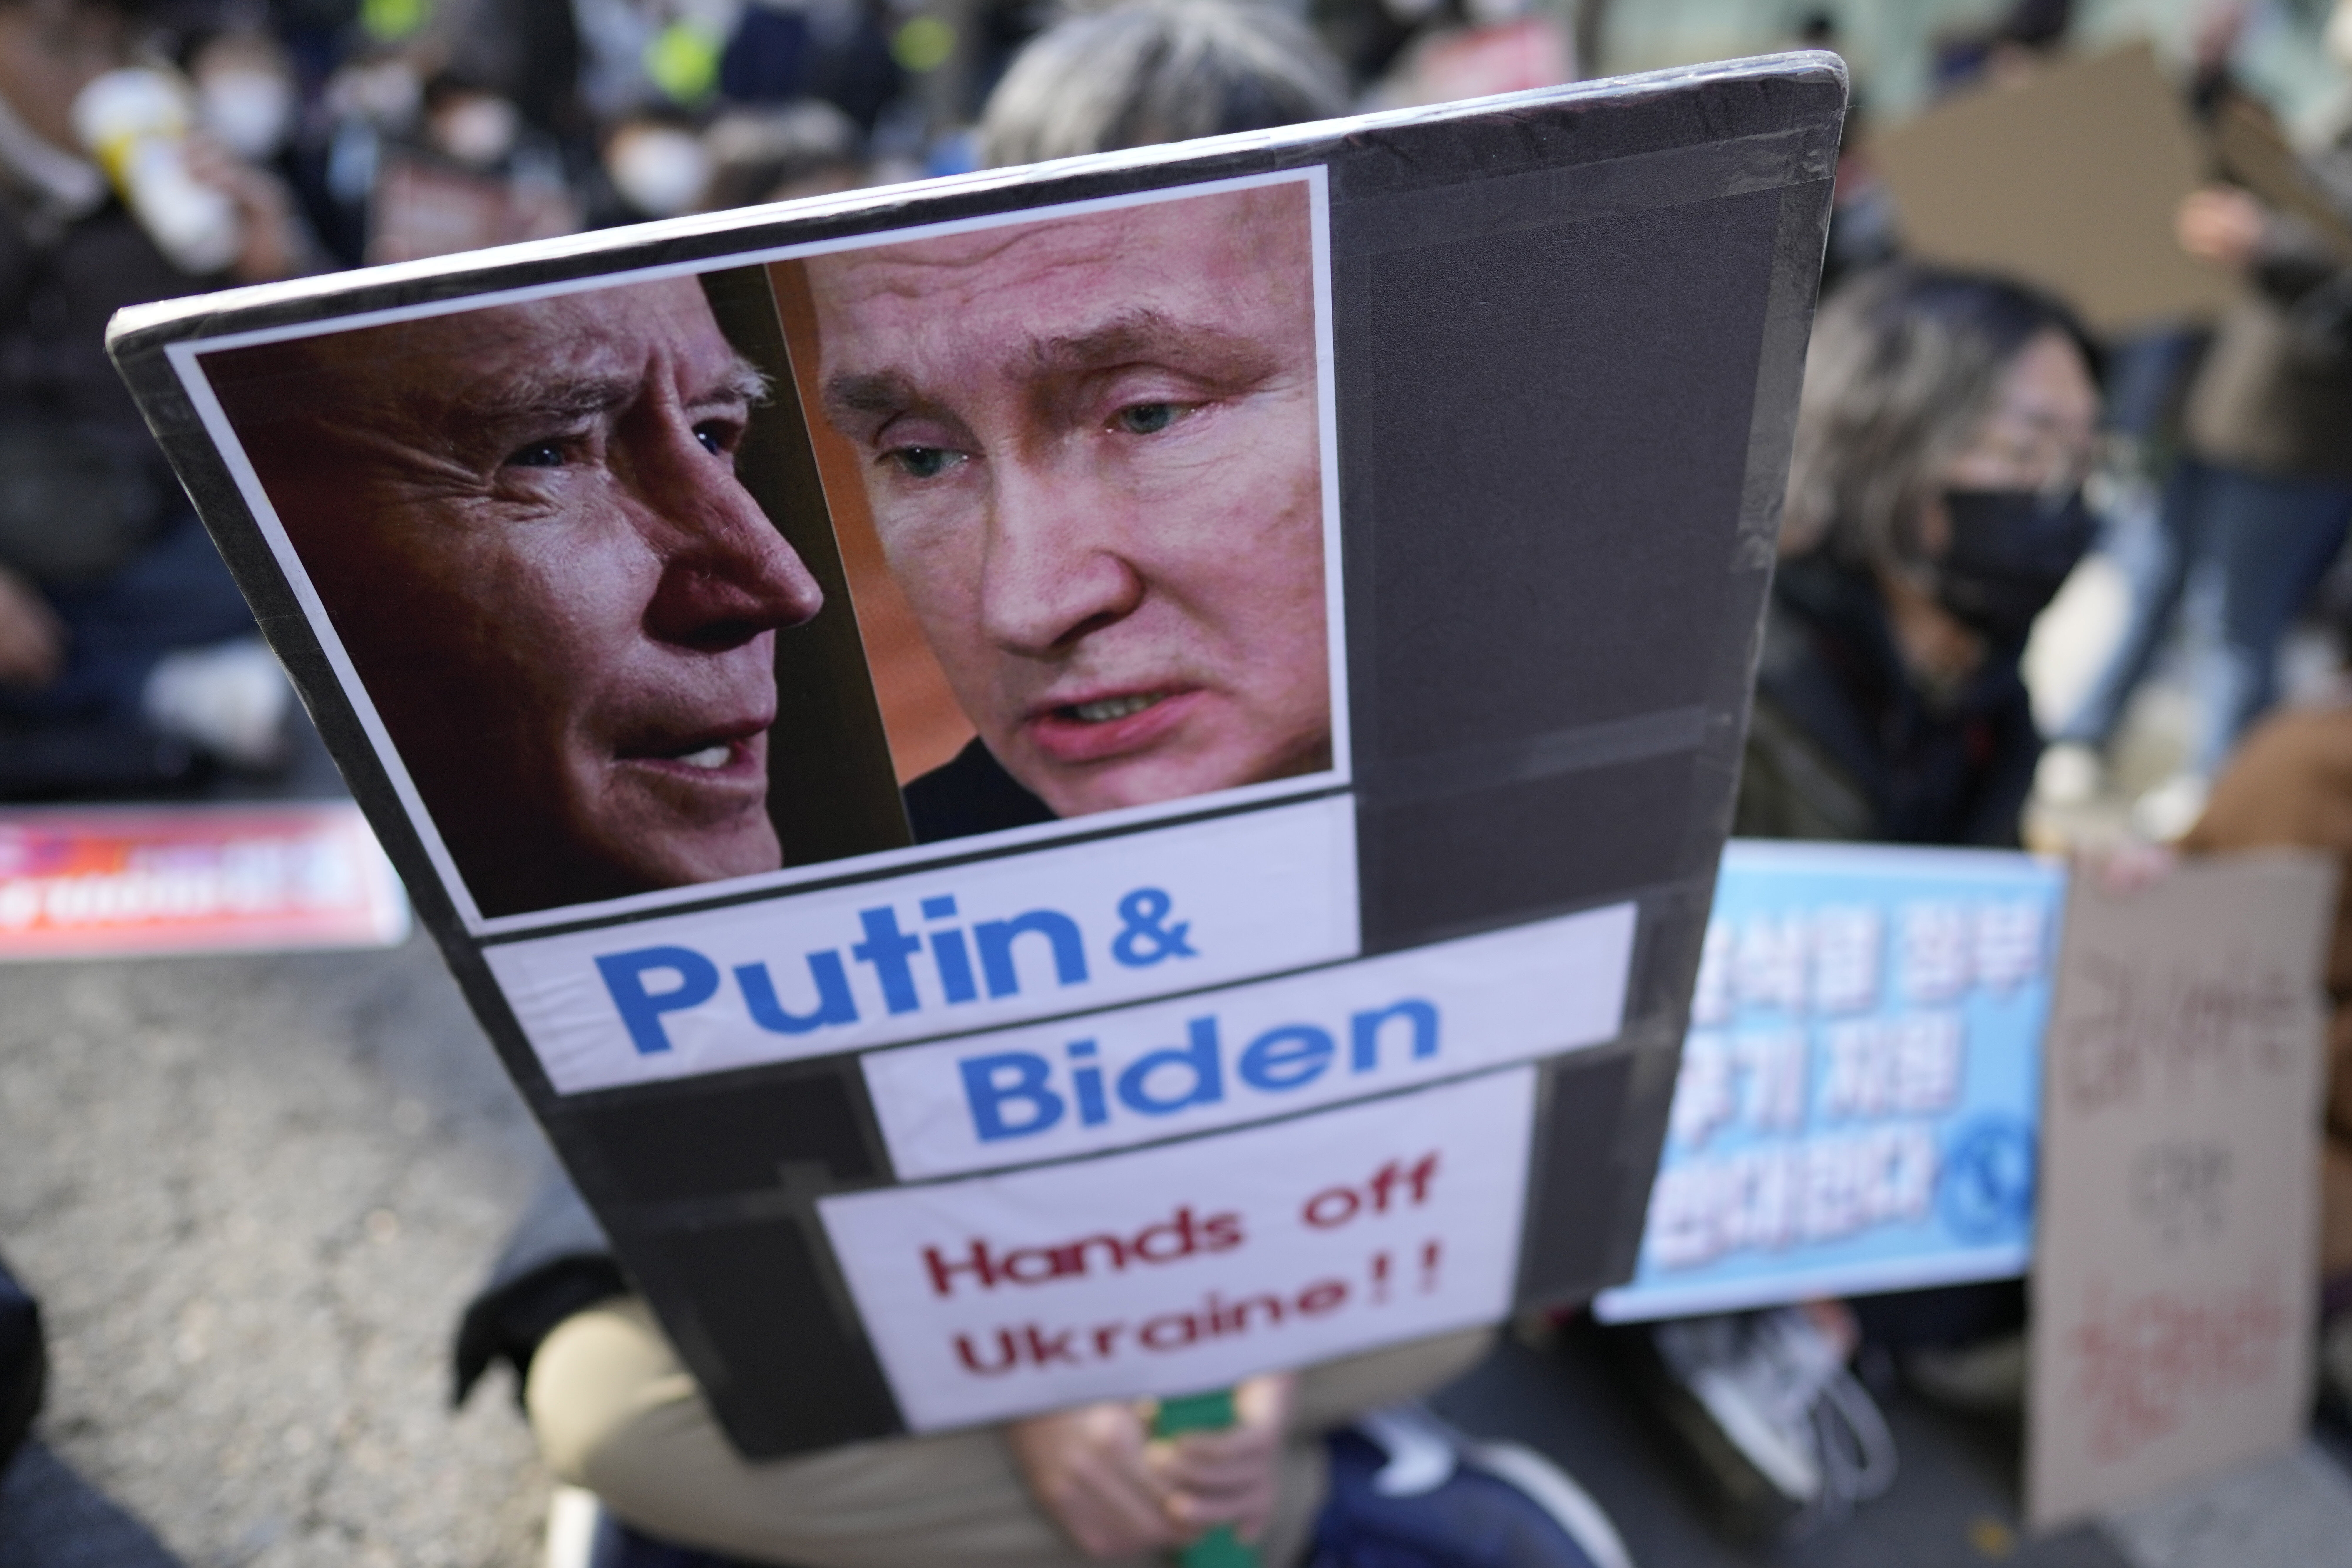 A protester holds a banner showing pictures of U.S. President Joe Biden, left, and Russian President Vladimir Putin during a rally to mark the one-year anniversary of Russia's invasion of Ukraine, in downtown Seoul, South Korea, Saturday, Feb. 25, 2023. (AP Photo/Lee Jin-man)